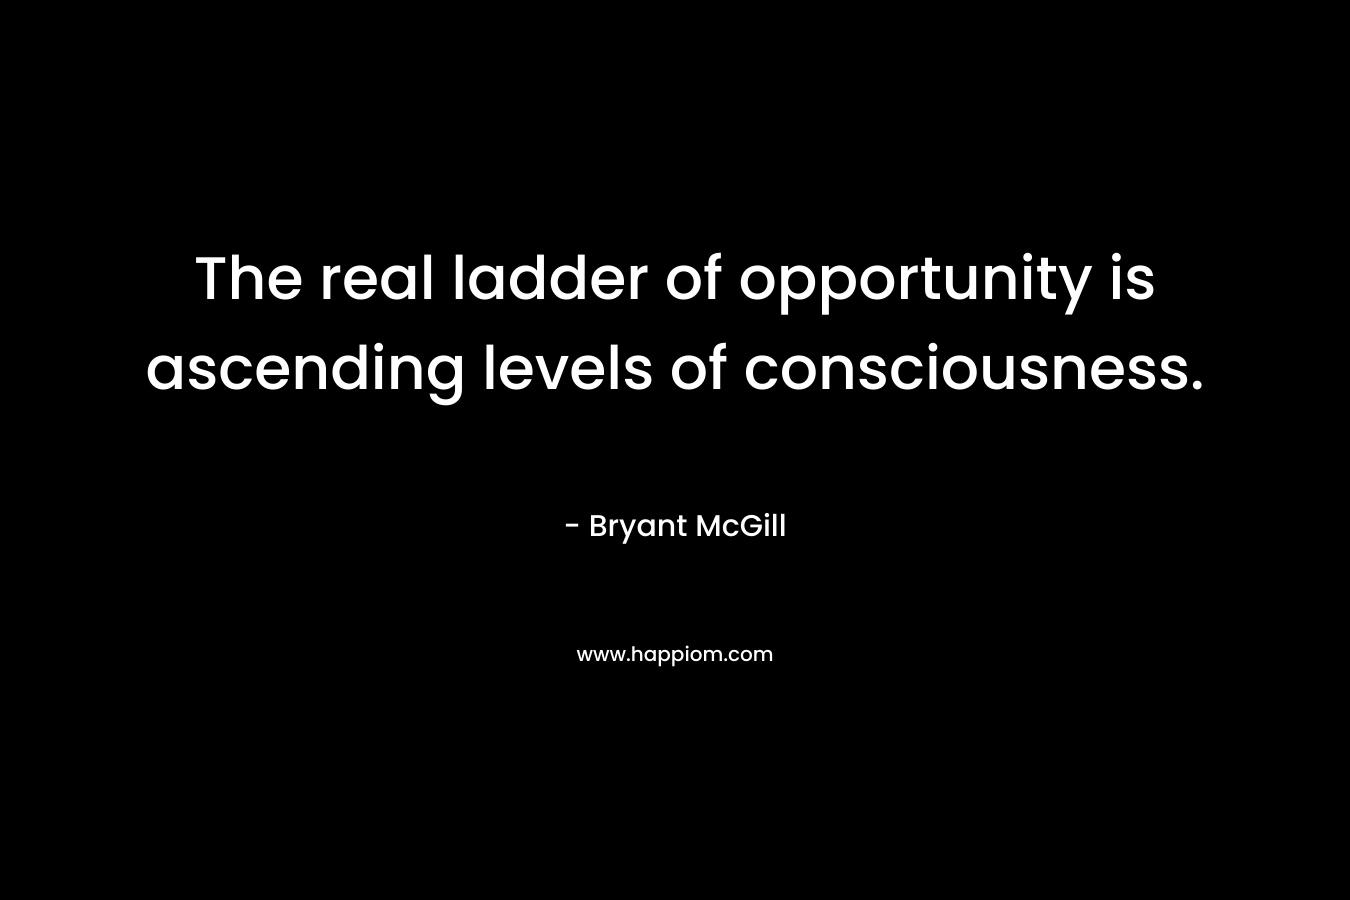 The real ladder of opportunity is ascending levels of consciousness.